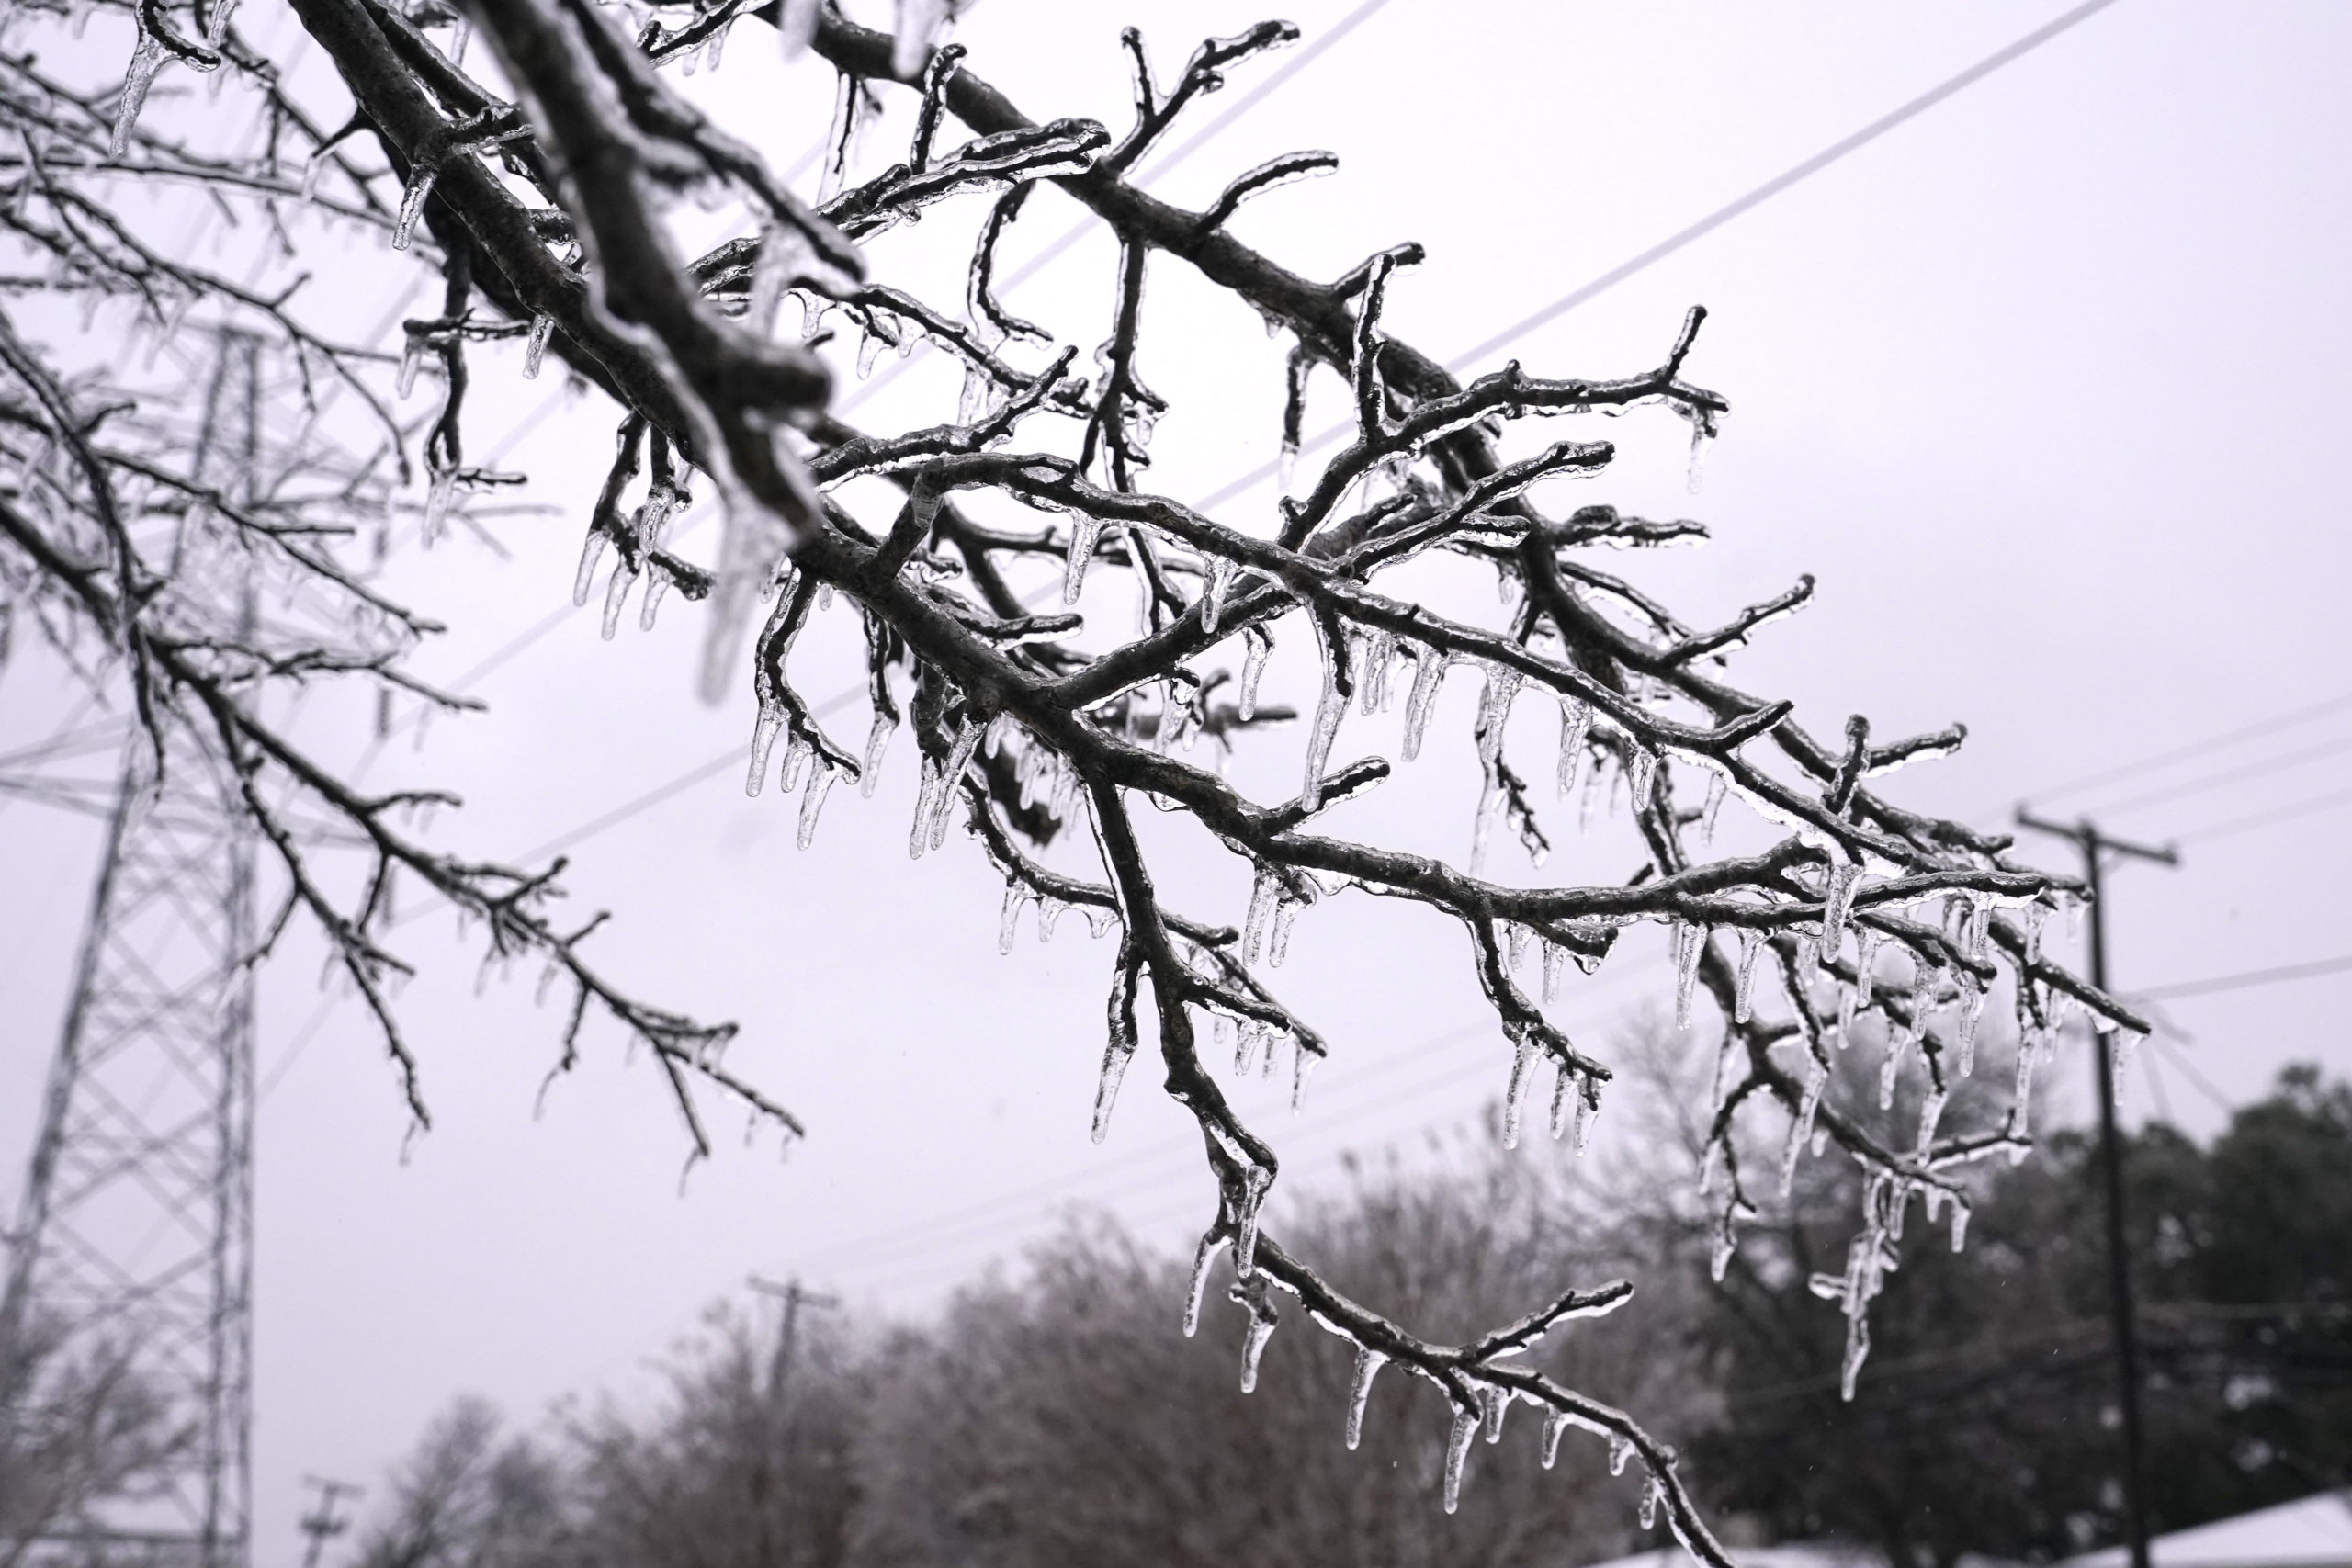 An ice-coated branch of a tree in the foreground, with more wintry trees and urban power lines behind the branch.